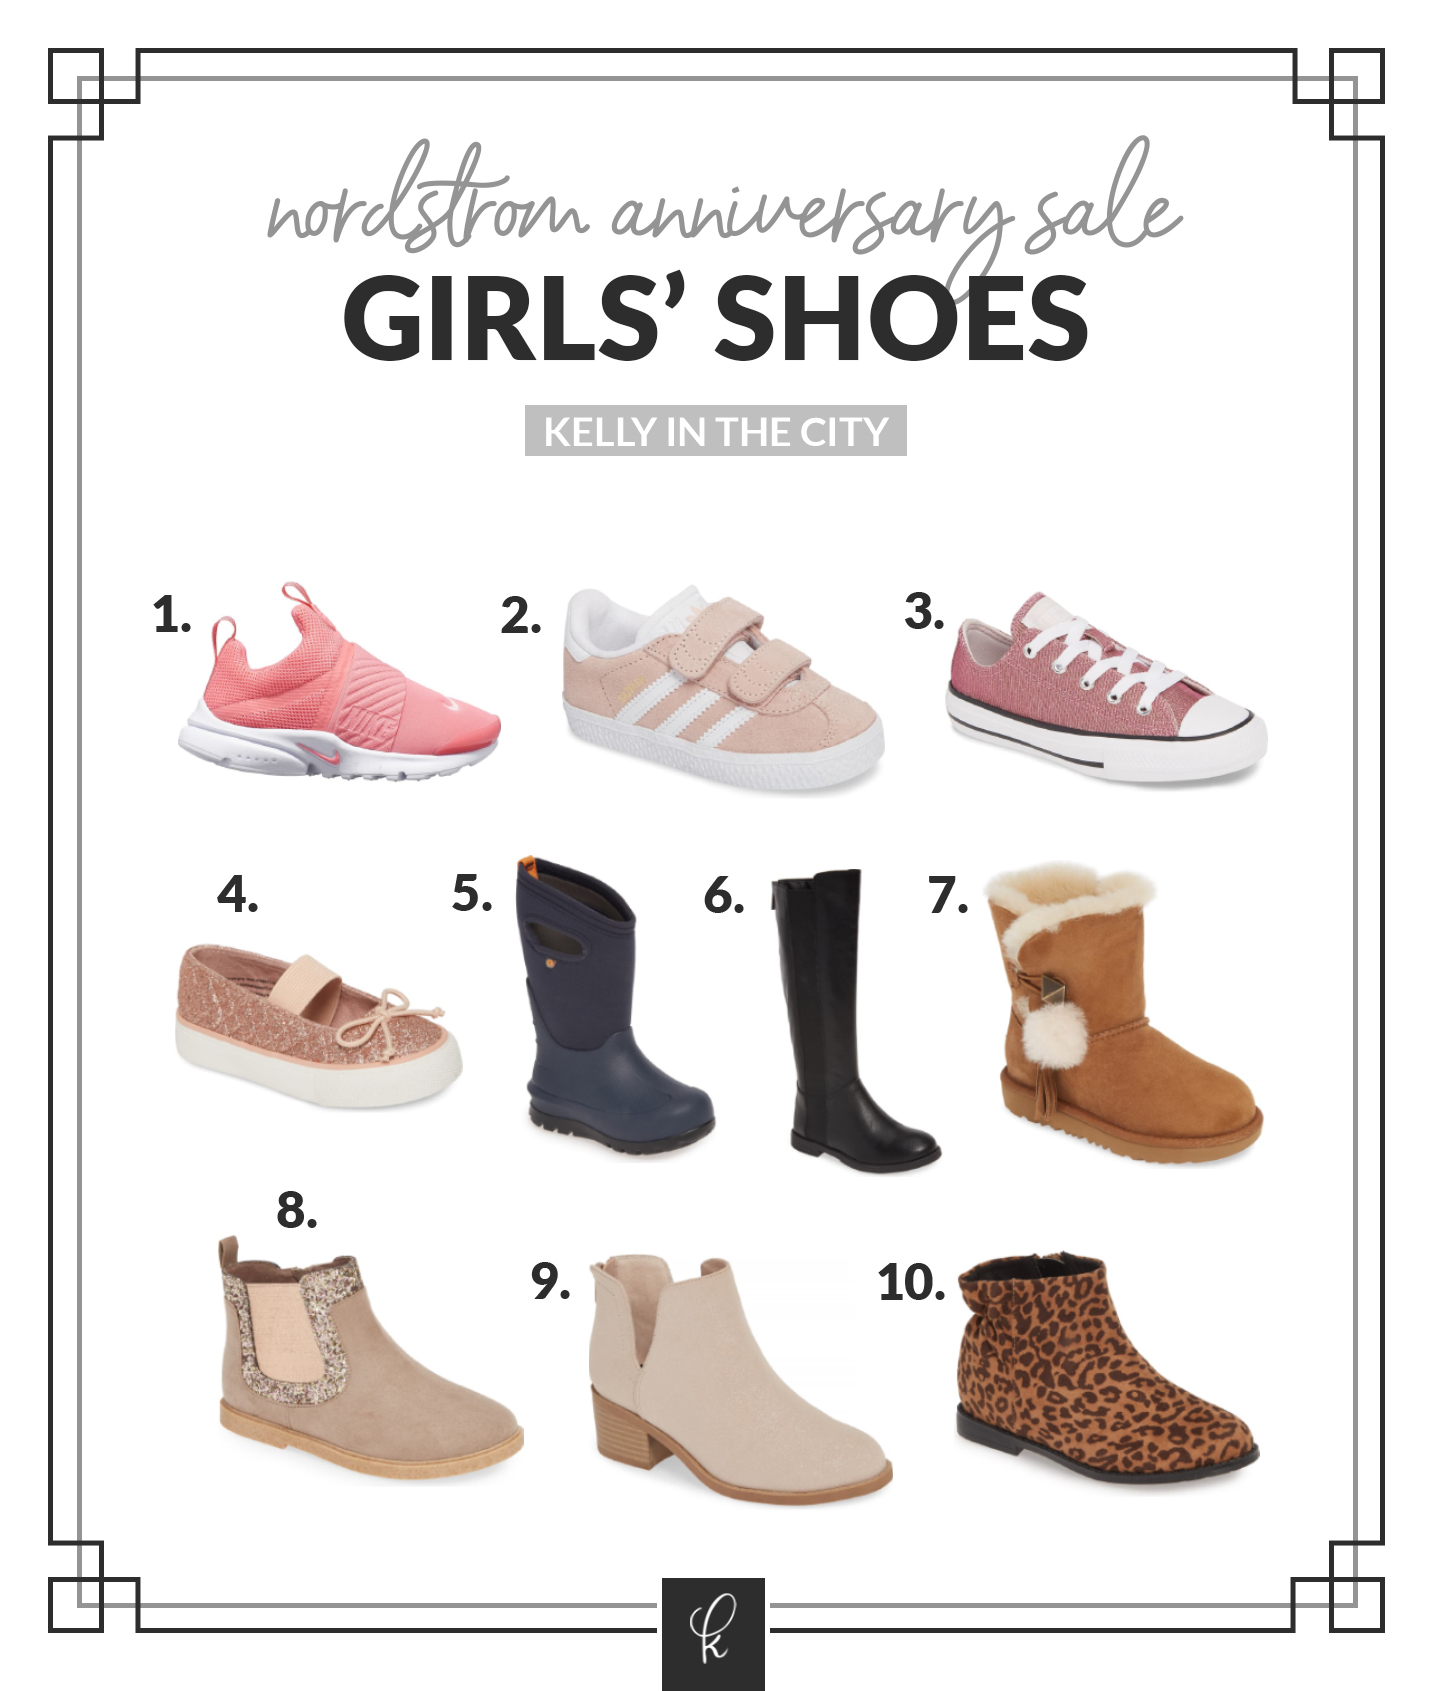 Emma and Lucy's Nordstrom Anniversary Sale Picks of girls' shoes